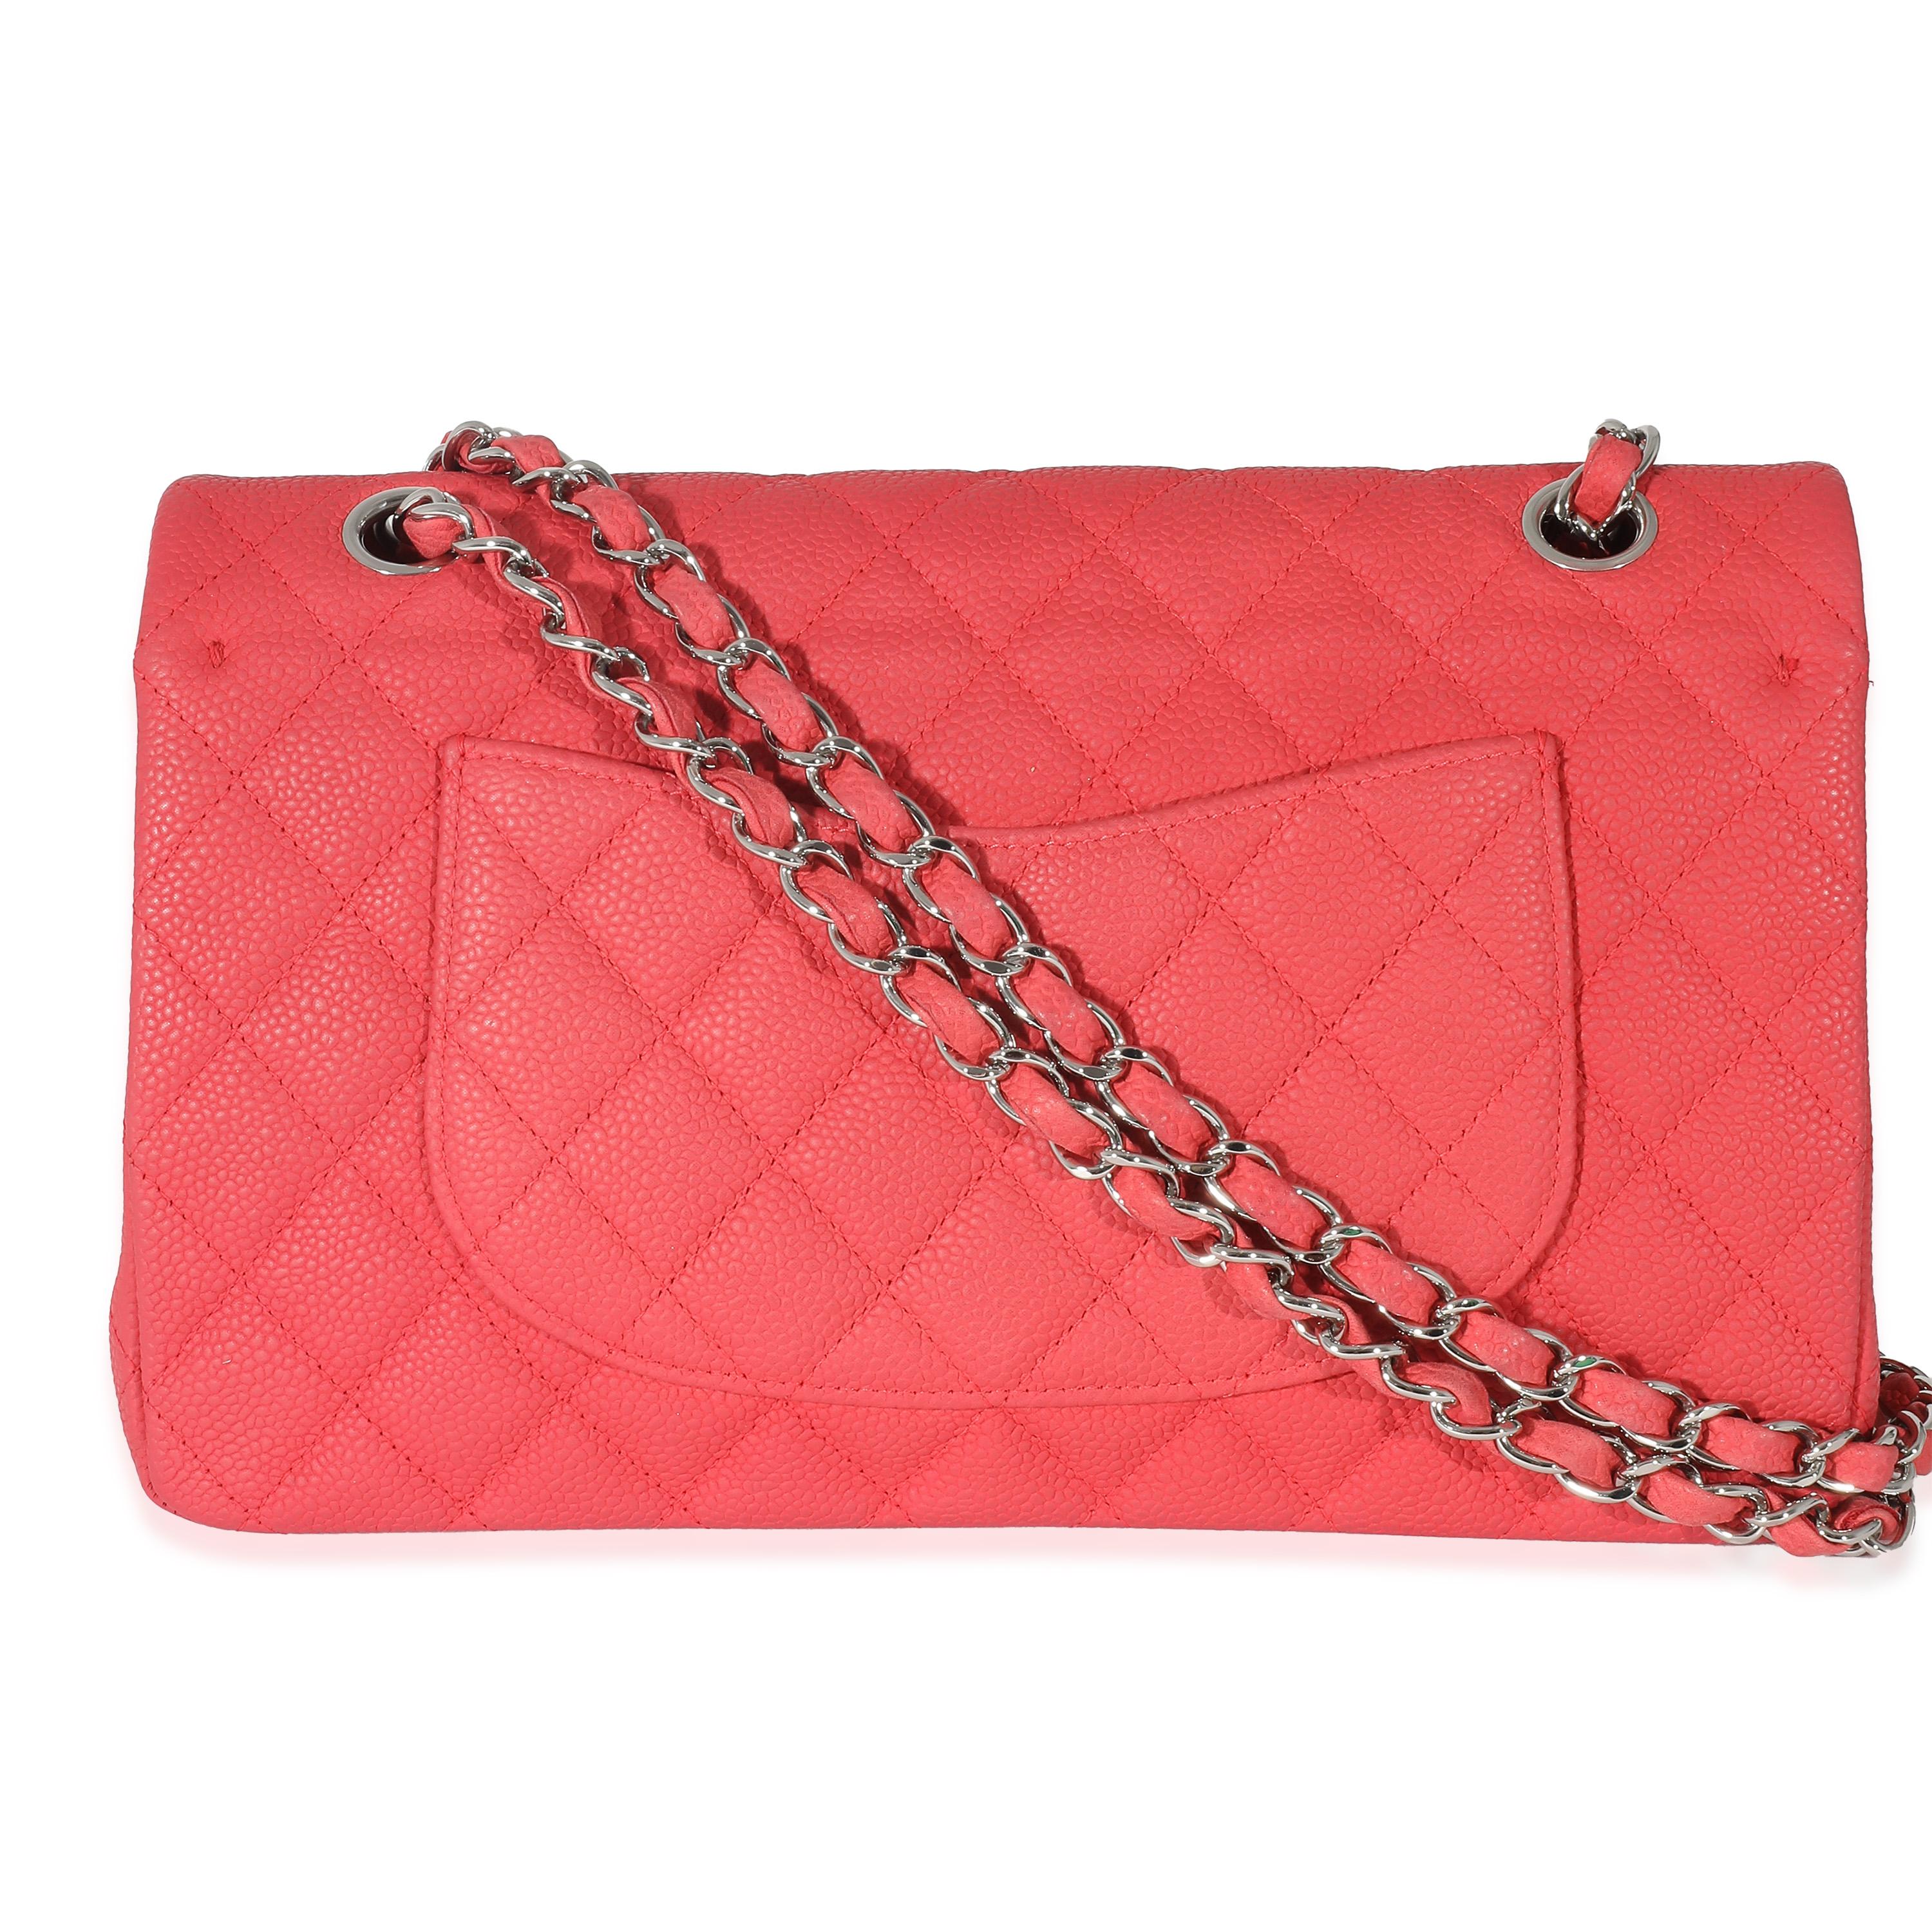 Chanel Red Matte Caviar Medium Double Flap Bag In Excellent Condition For Sale In New York, NY